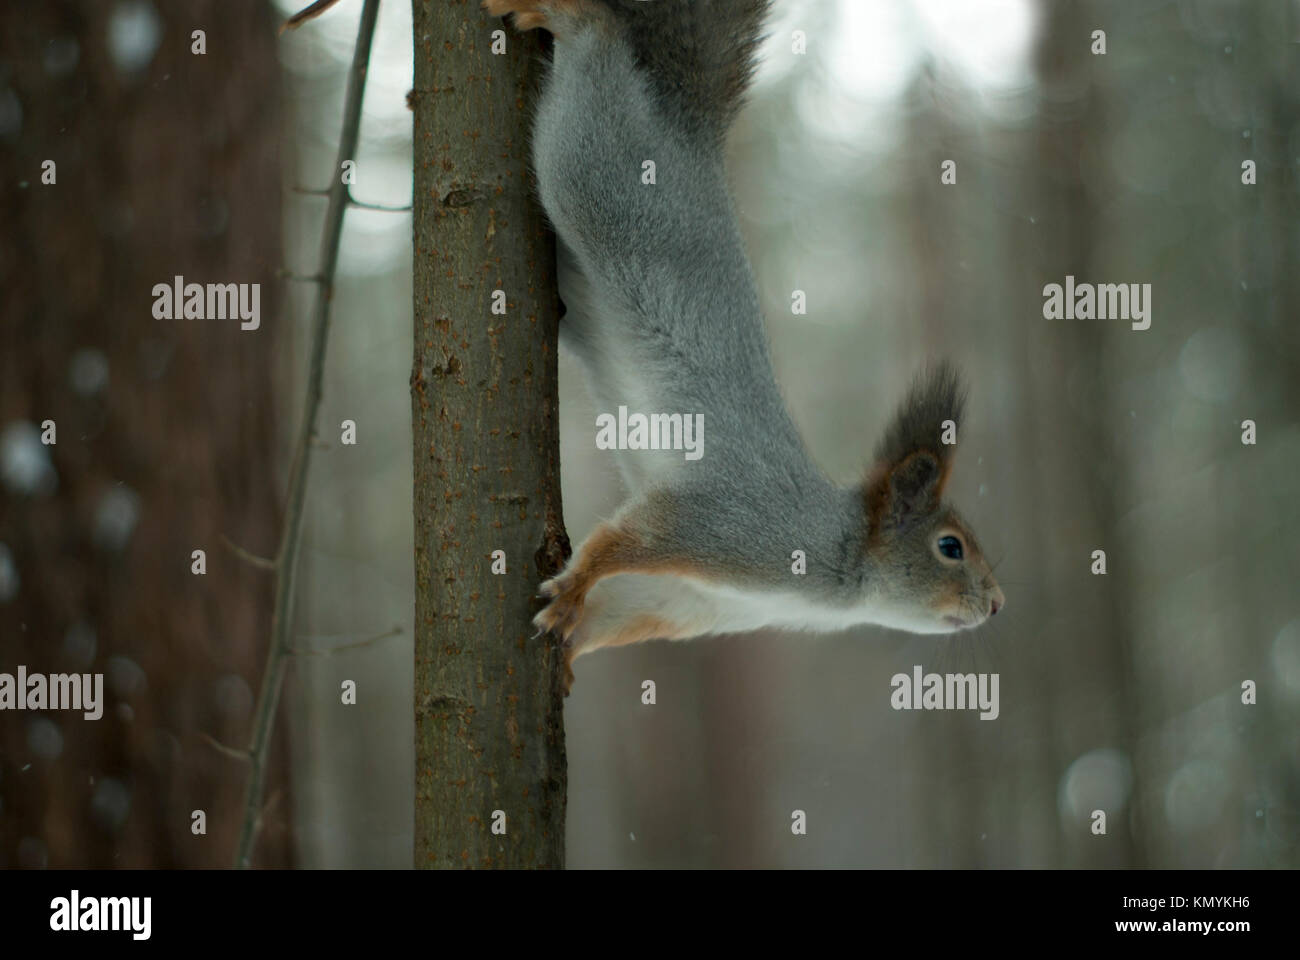 Eurasian red squirrel in grey winter coat with ear-tufts prepares to jump, descending headlong over a thin tree against the background of a blurred wi Stock Photo